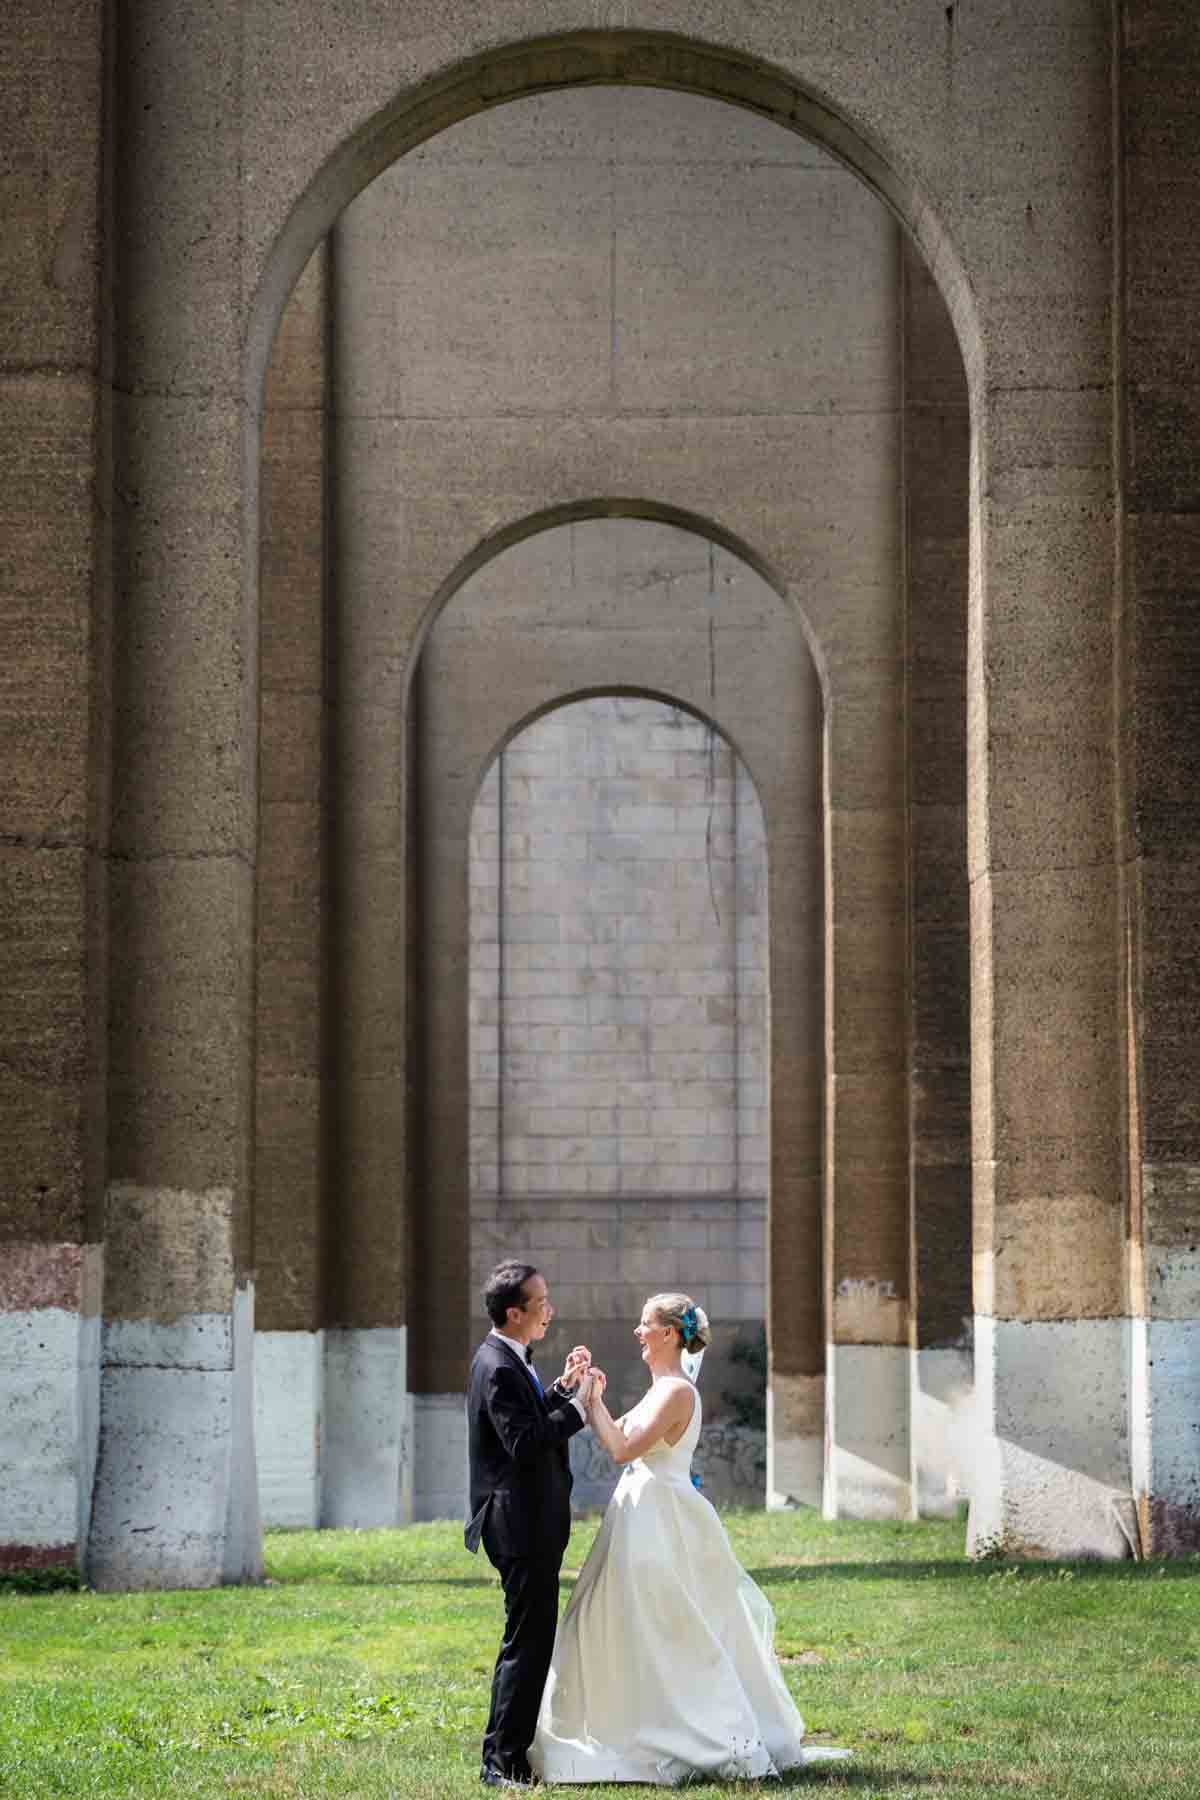 Bride and groom holding hands under Hell Gate Bridge arches in Astoria Park